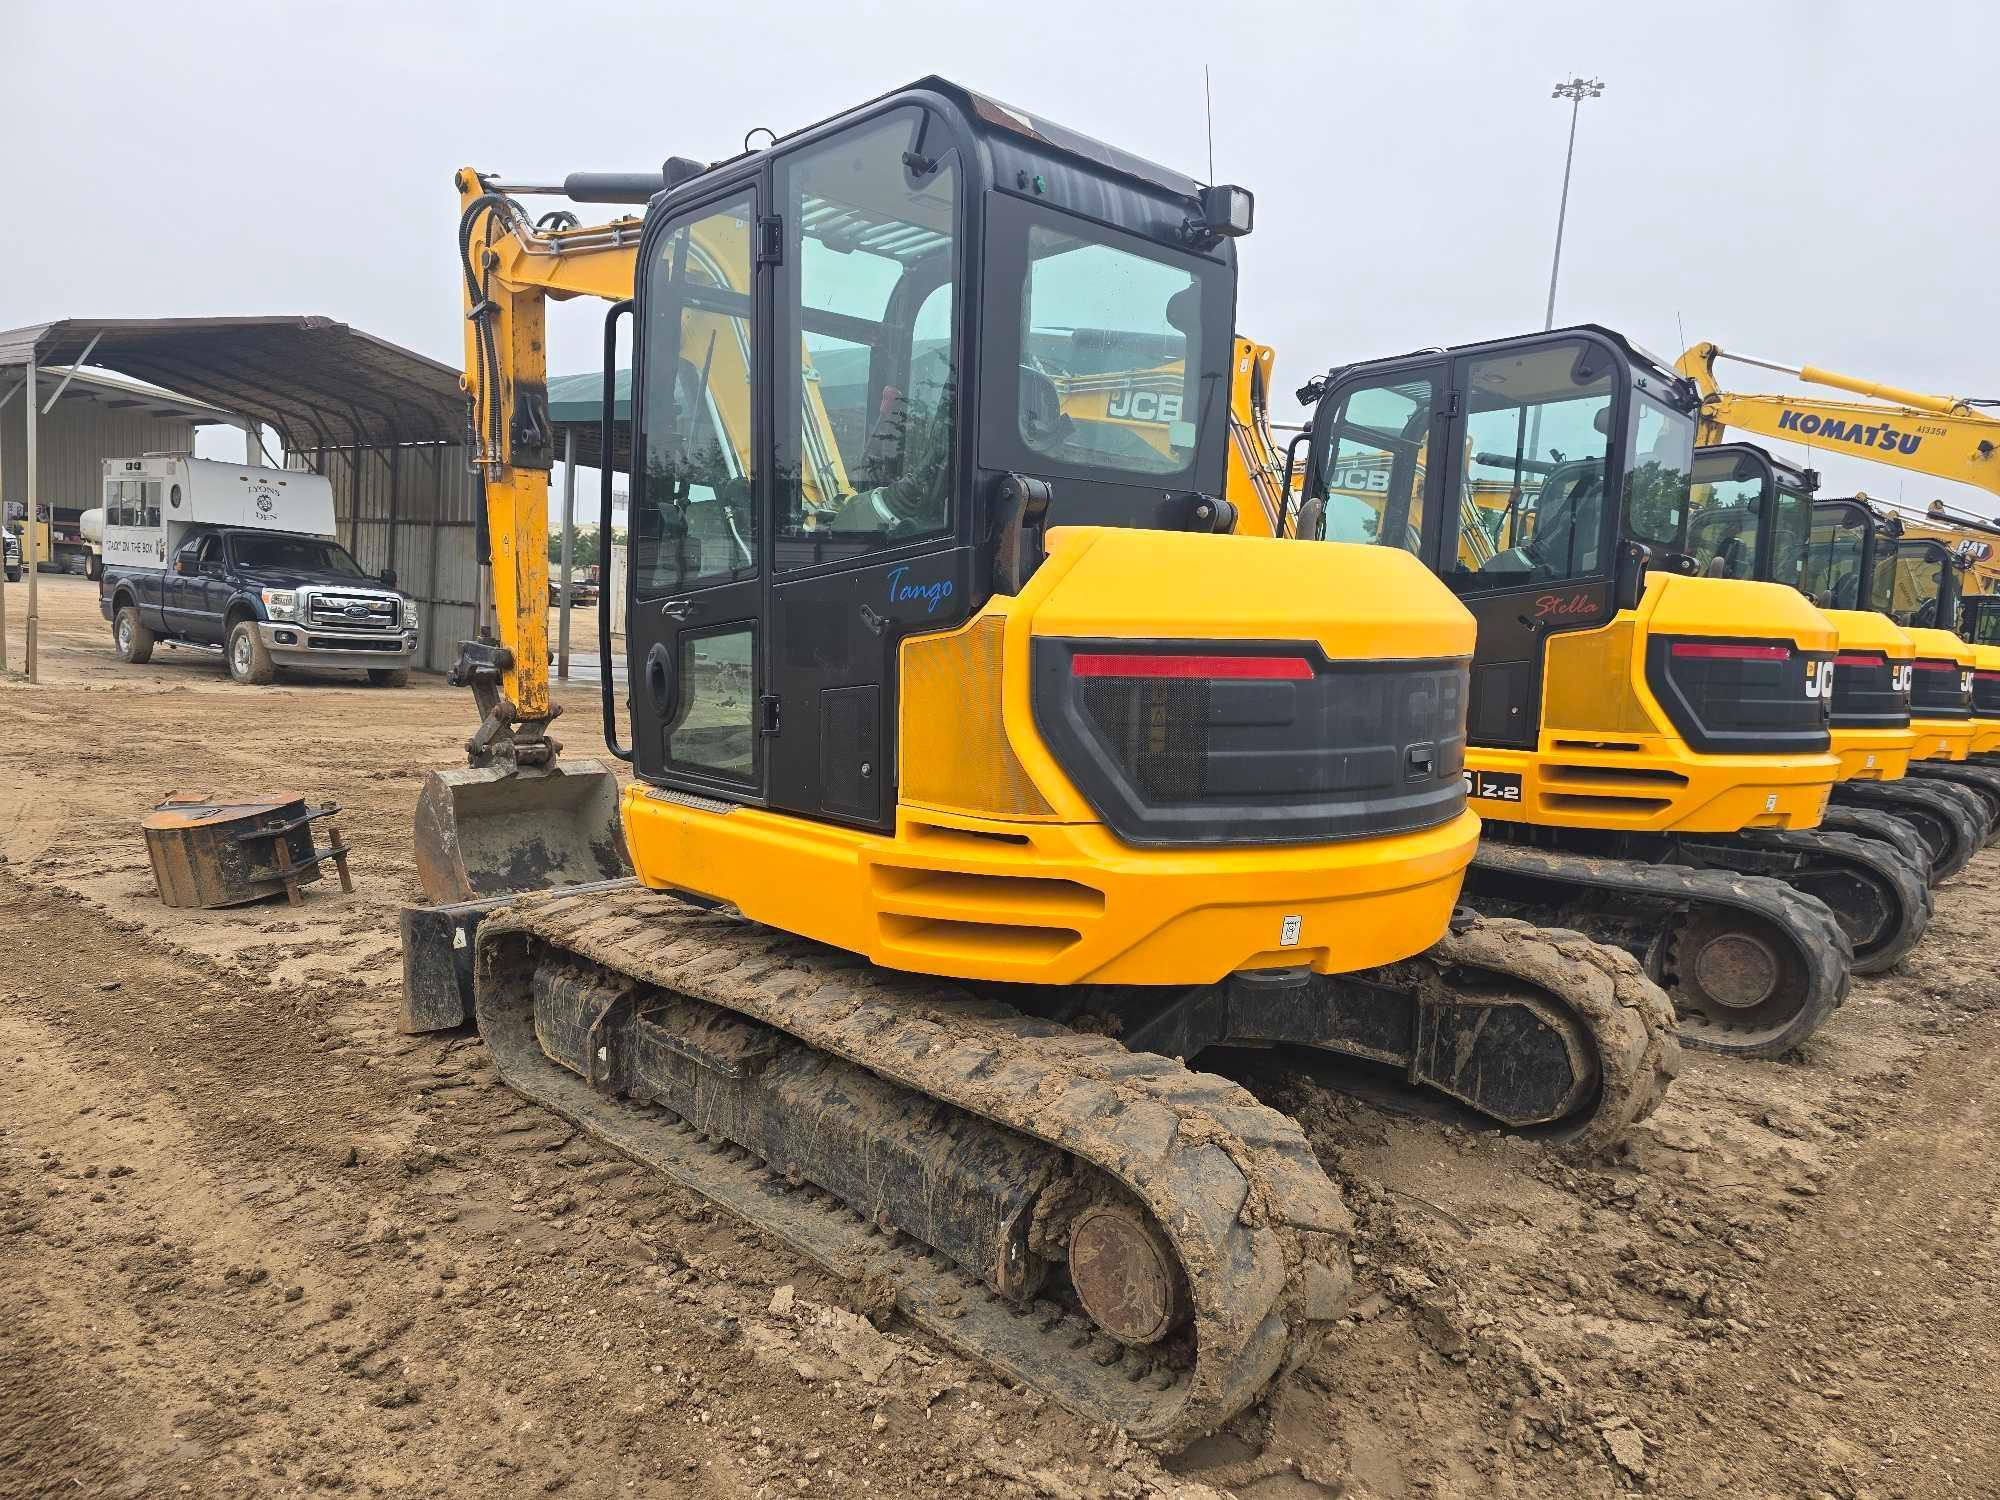 2021 JCB 85Z-2 HYDRAULIC EXCAVATOR SN:2972209 powered by Kohler diesel engine, equipped with Cab,